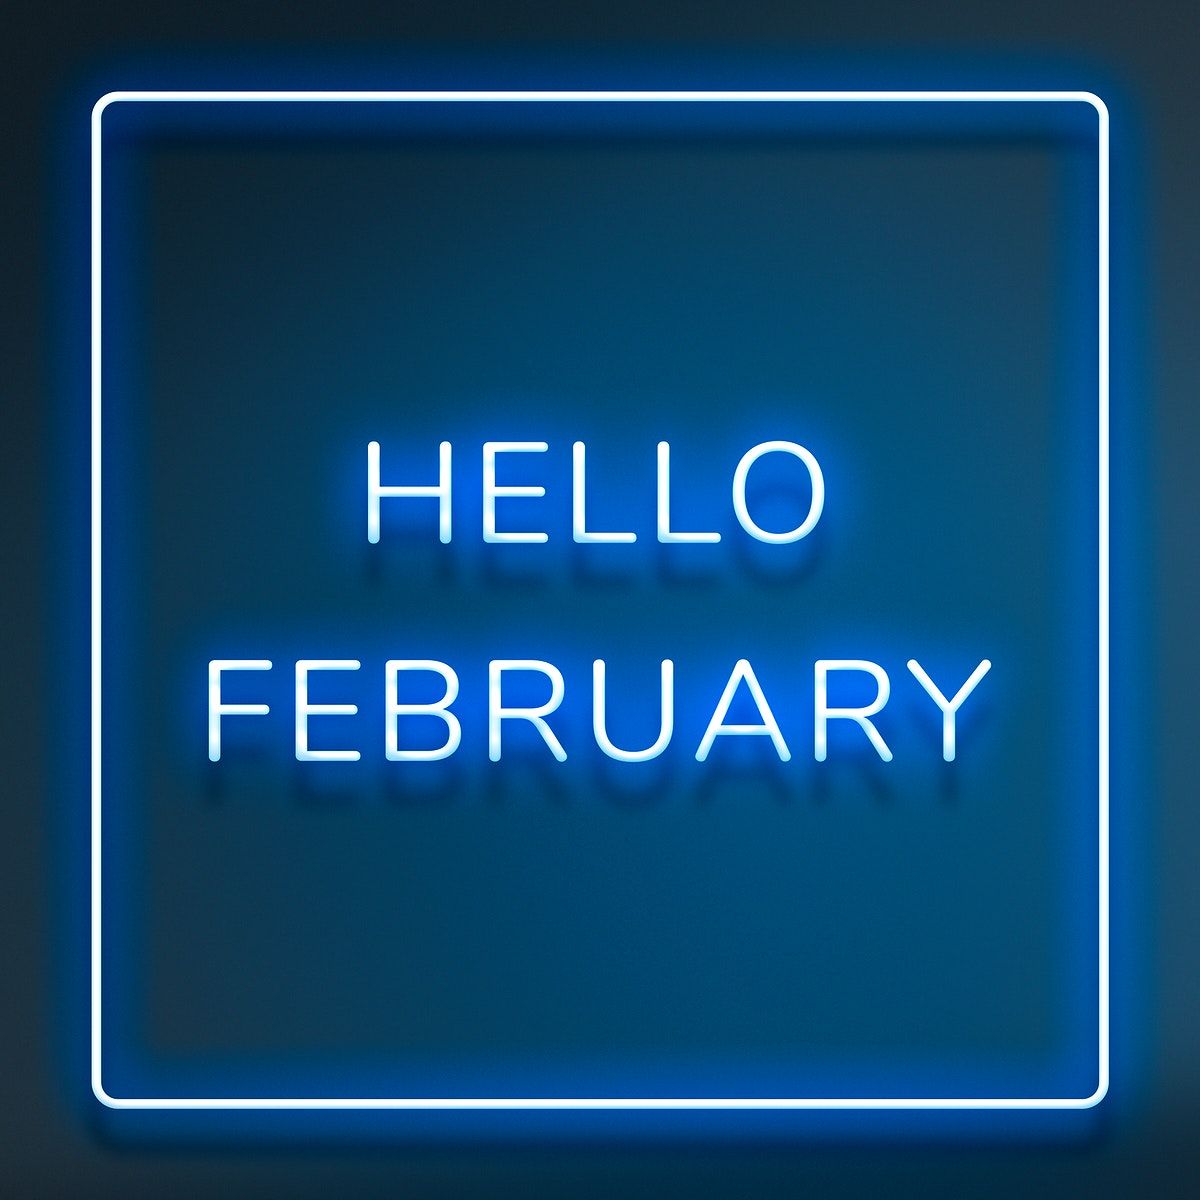 Download free image of Hello February frame neon border text by Hein about hello